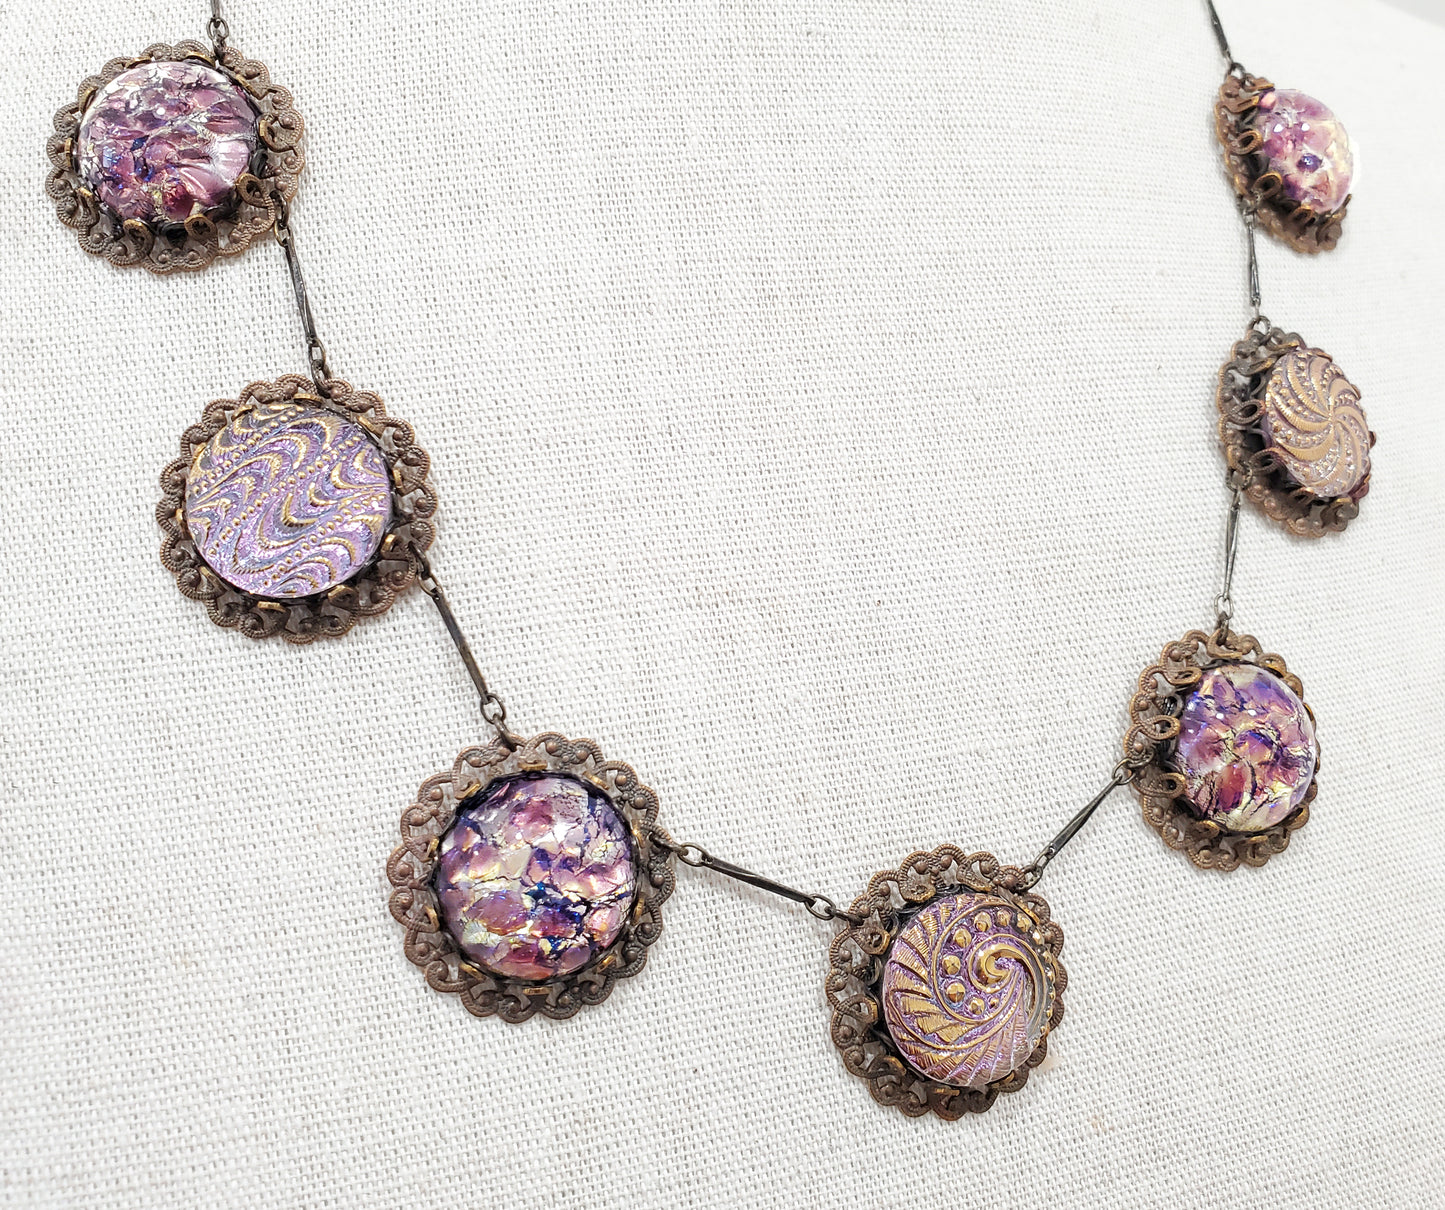 Amethyst, Topaz, and Gold Patina Necklace